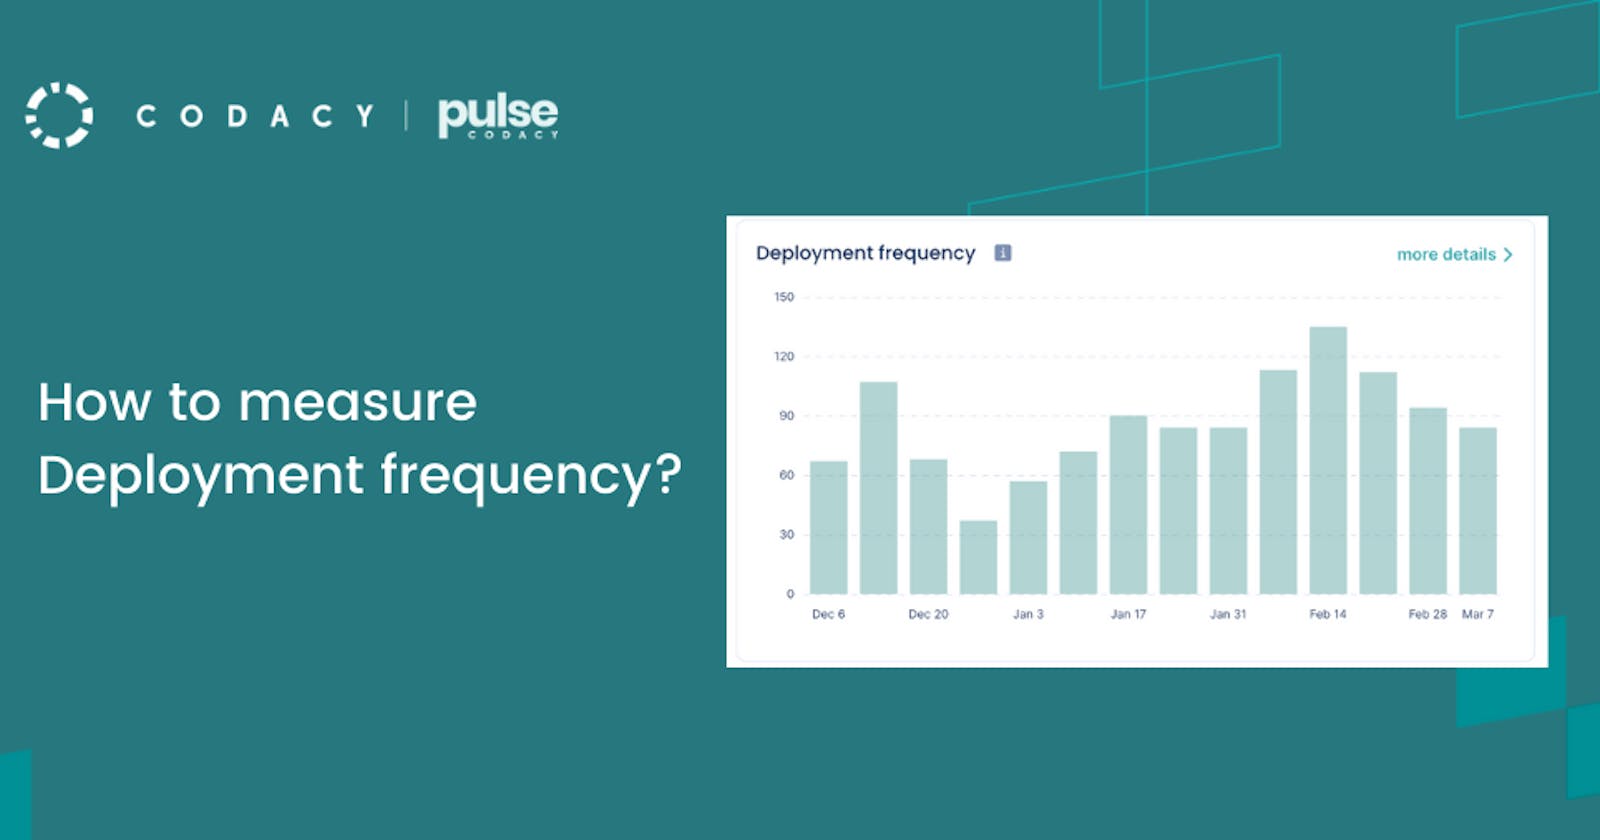 How do you measure Deployment frequency?